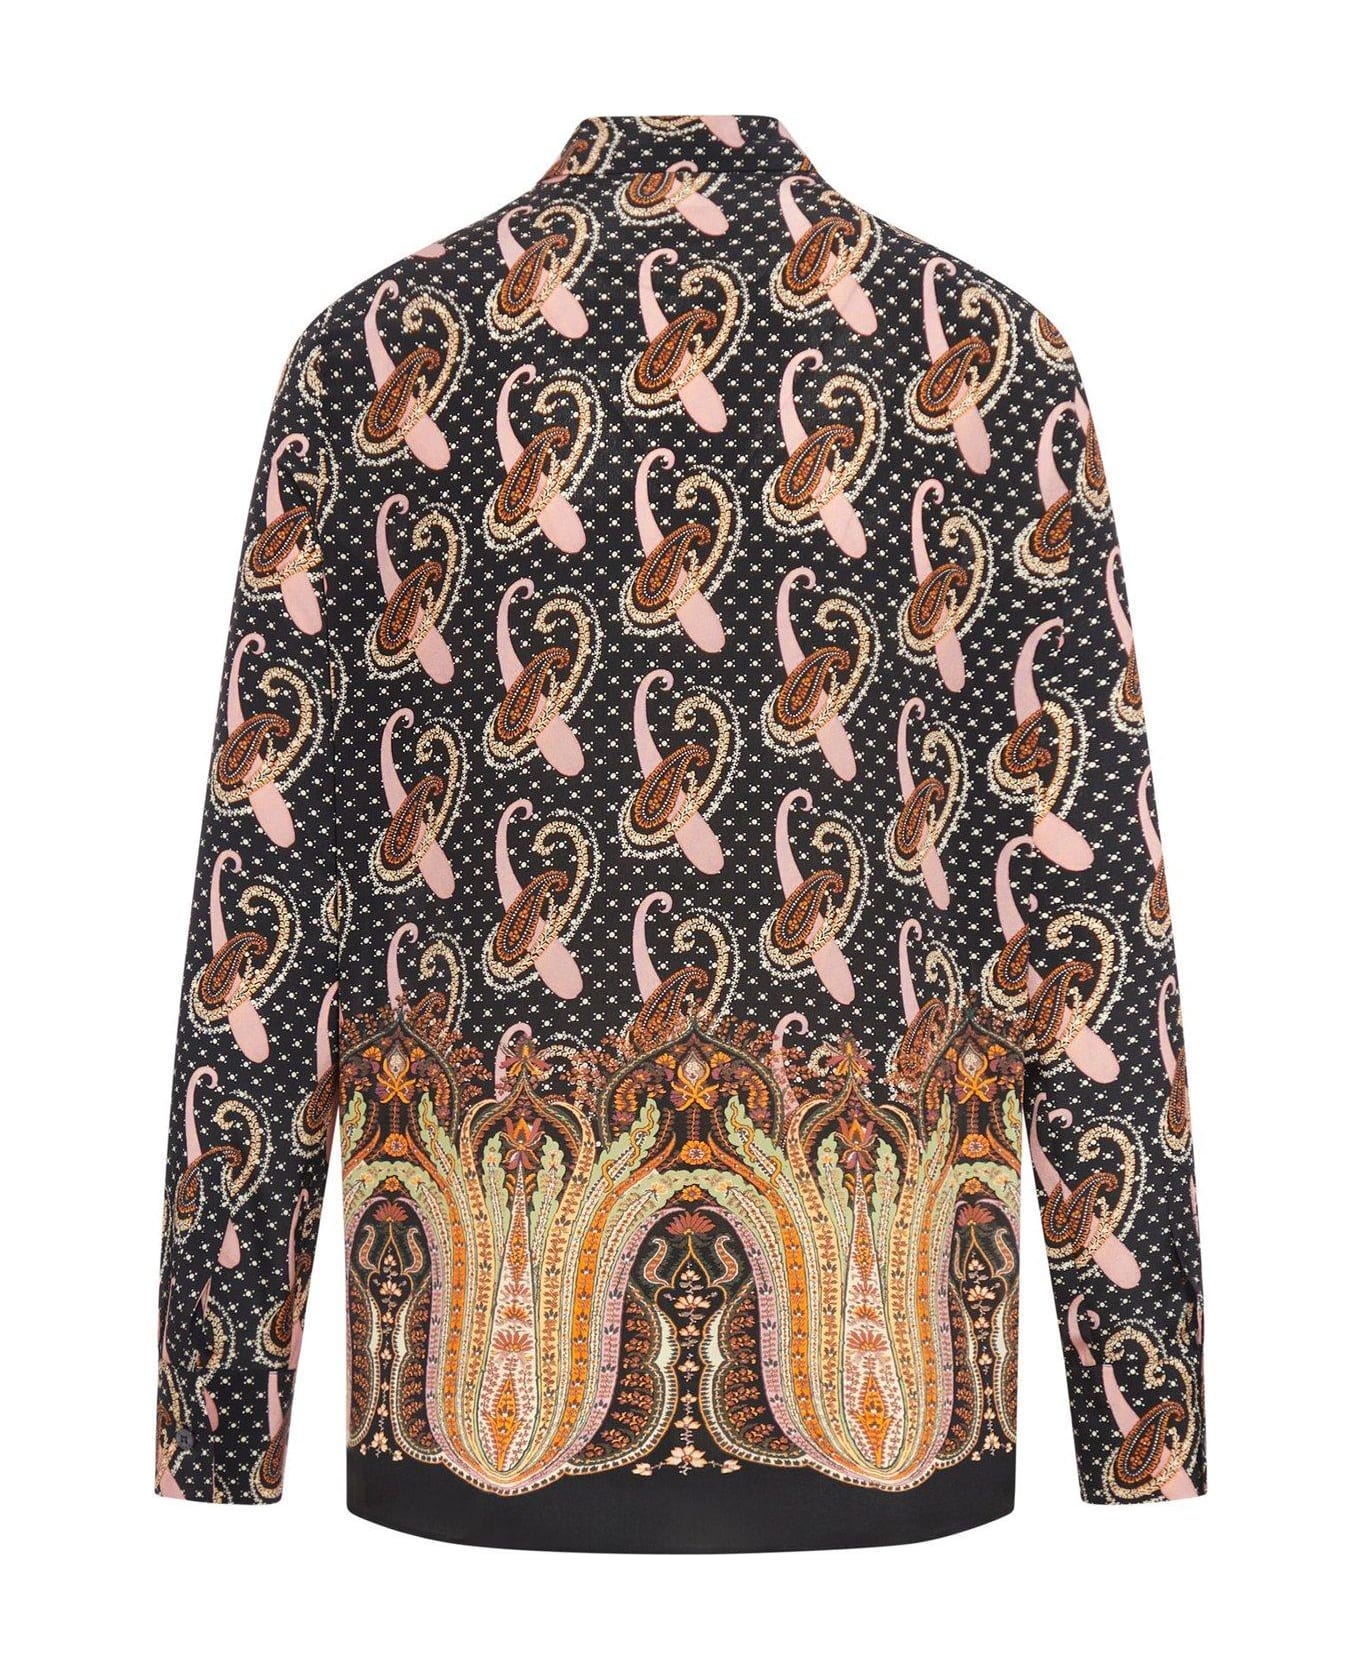 Etro All-over Patterned Long-sleeved Shirt - Black